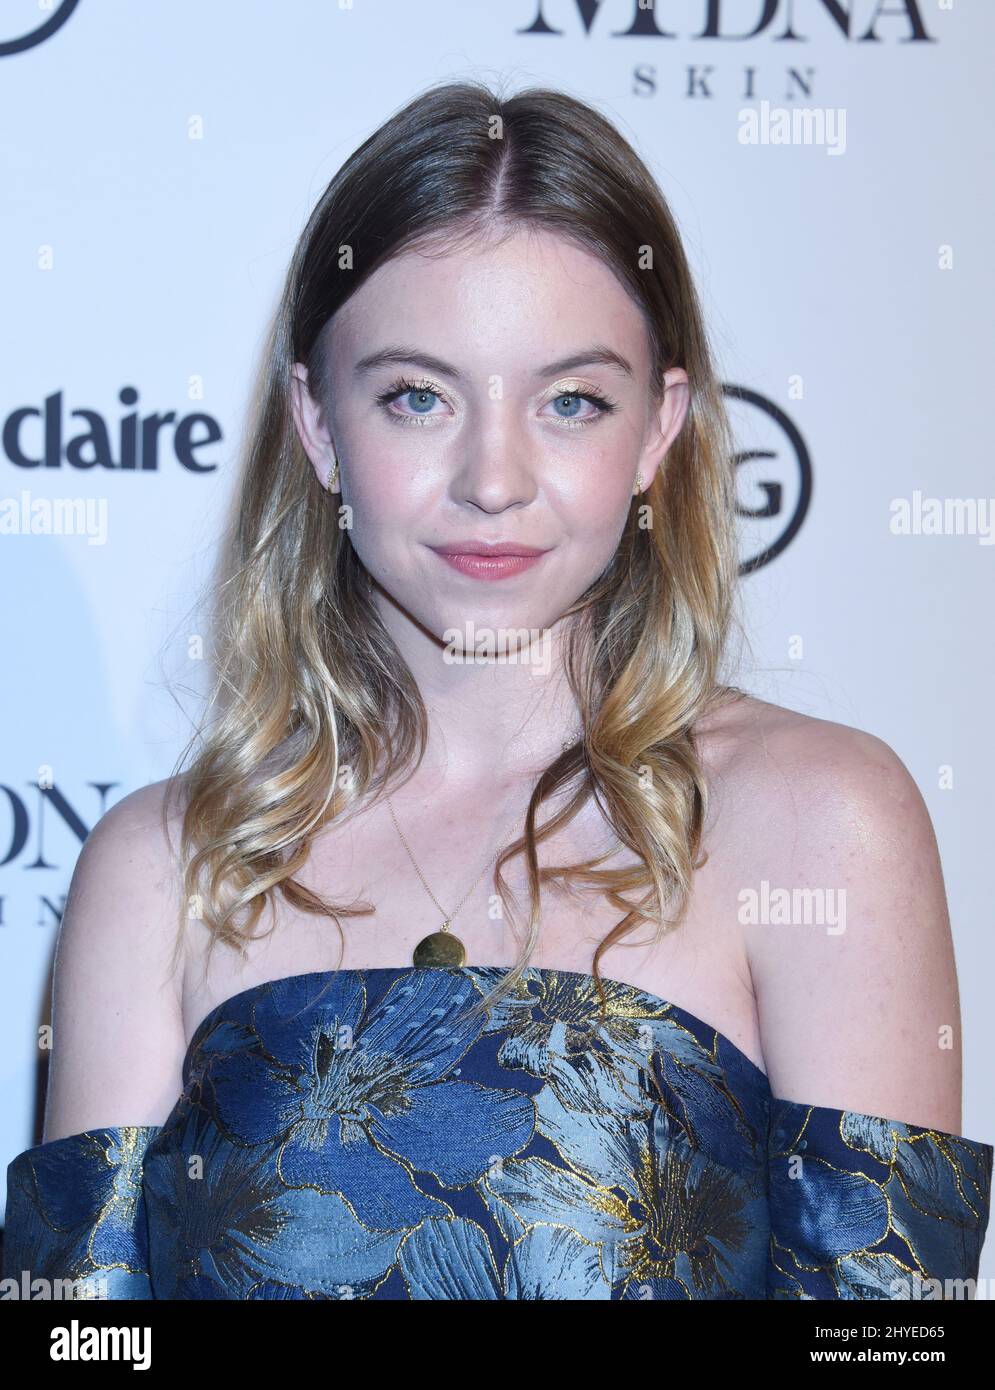 Sydney Sweeney at 2018 Marie Claire 'Image Makers Awards' held at the Delilah LA on January 11, 2018 in West Hollywood, CA. Stock Photo